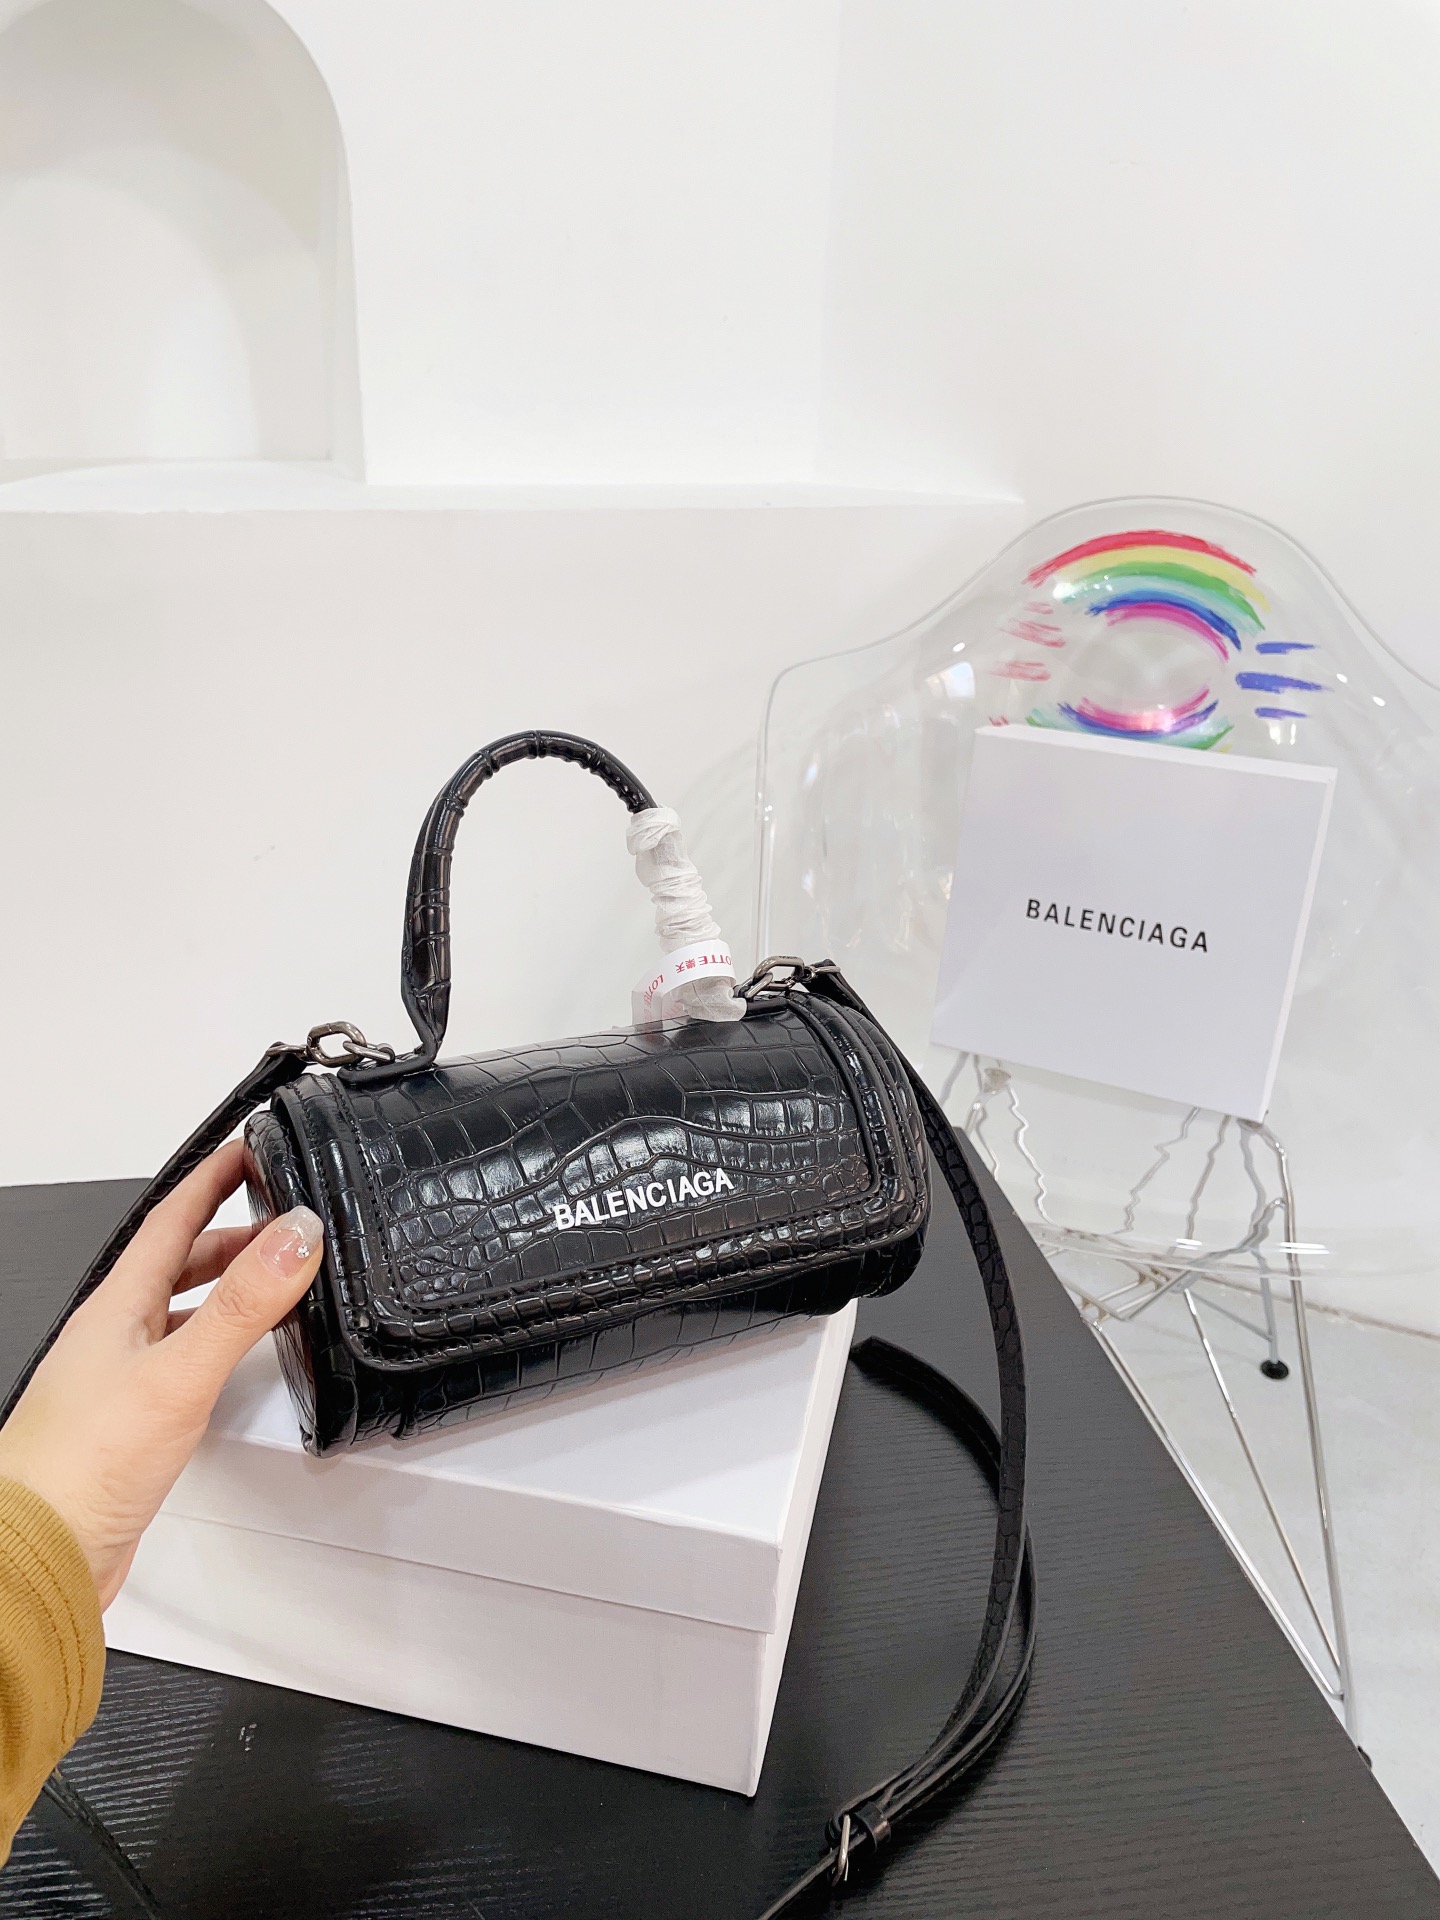 , Balenciaga Small Pillow Portable Bucket Bag in gift box is recommended. It has a simple and elegan